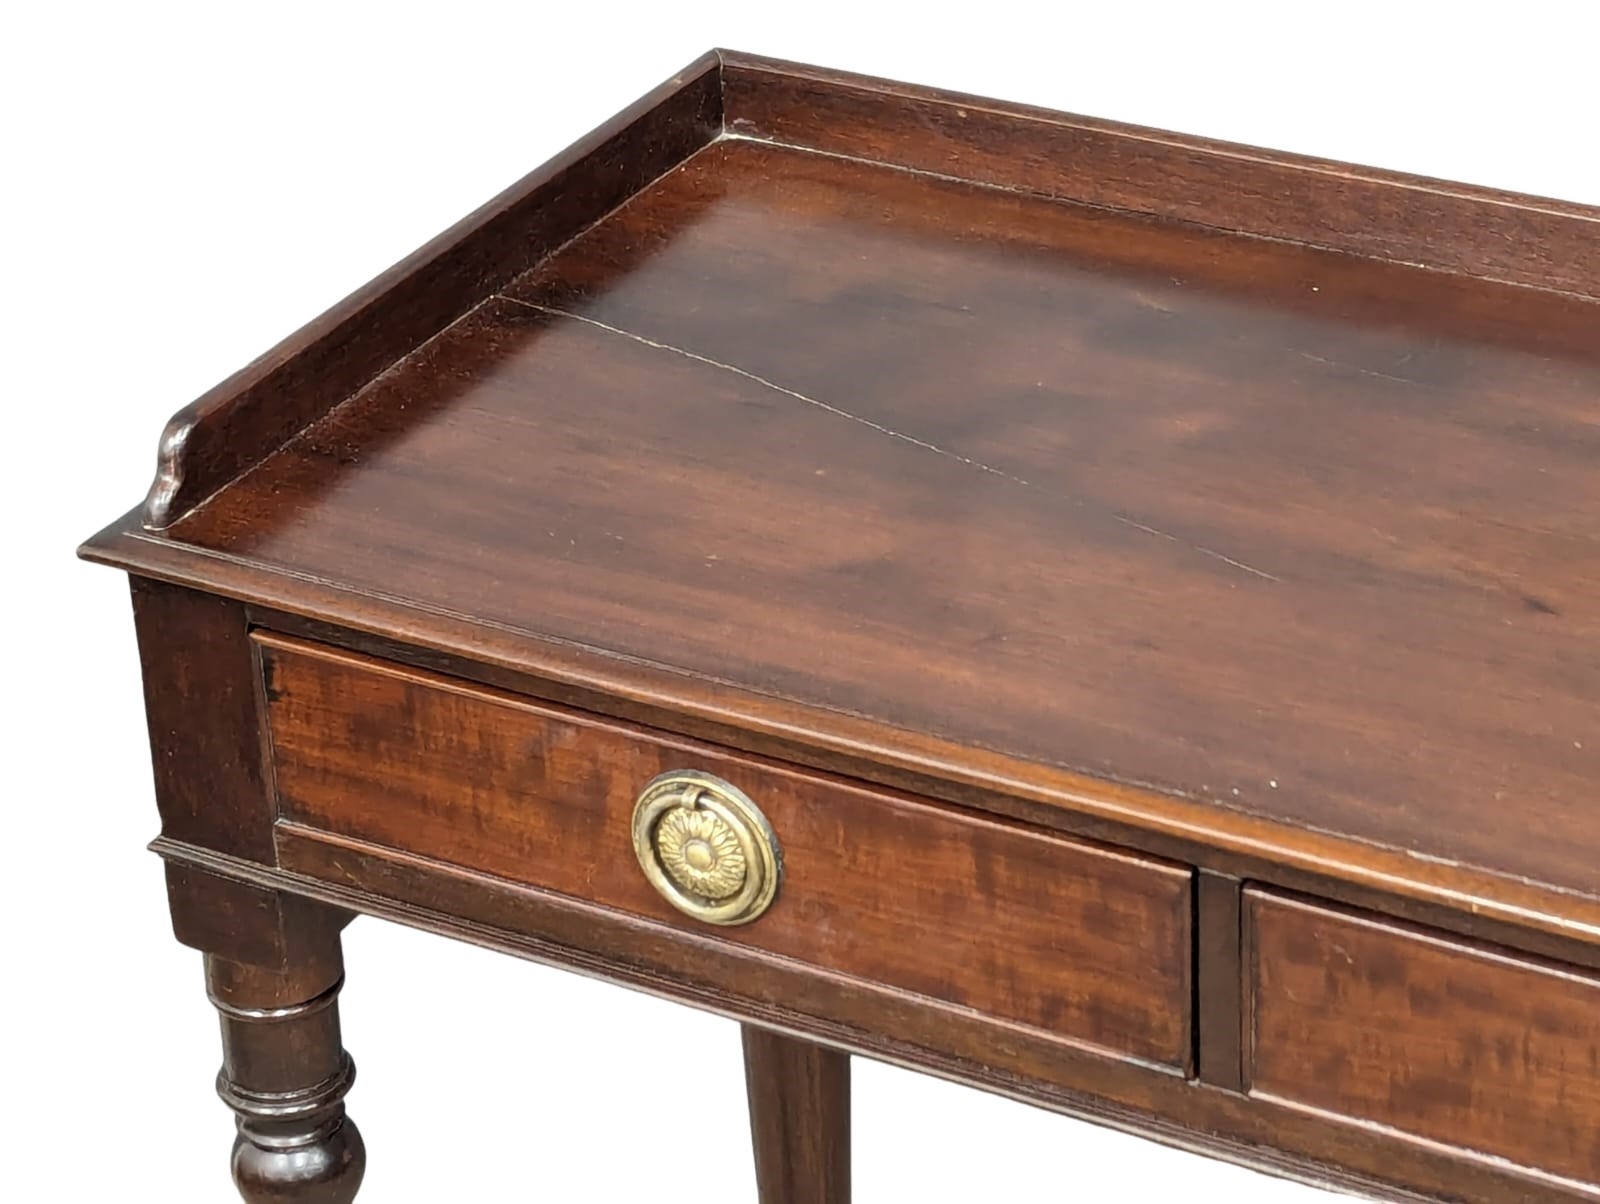 A Victorian mahogany gallery back hall table with 2 drawers with turned tapering legs. 79.5x38x78cm - Image 5 of 6